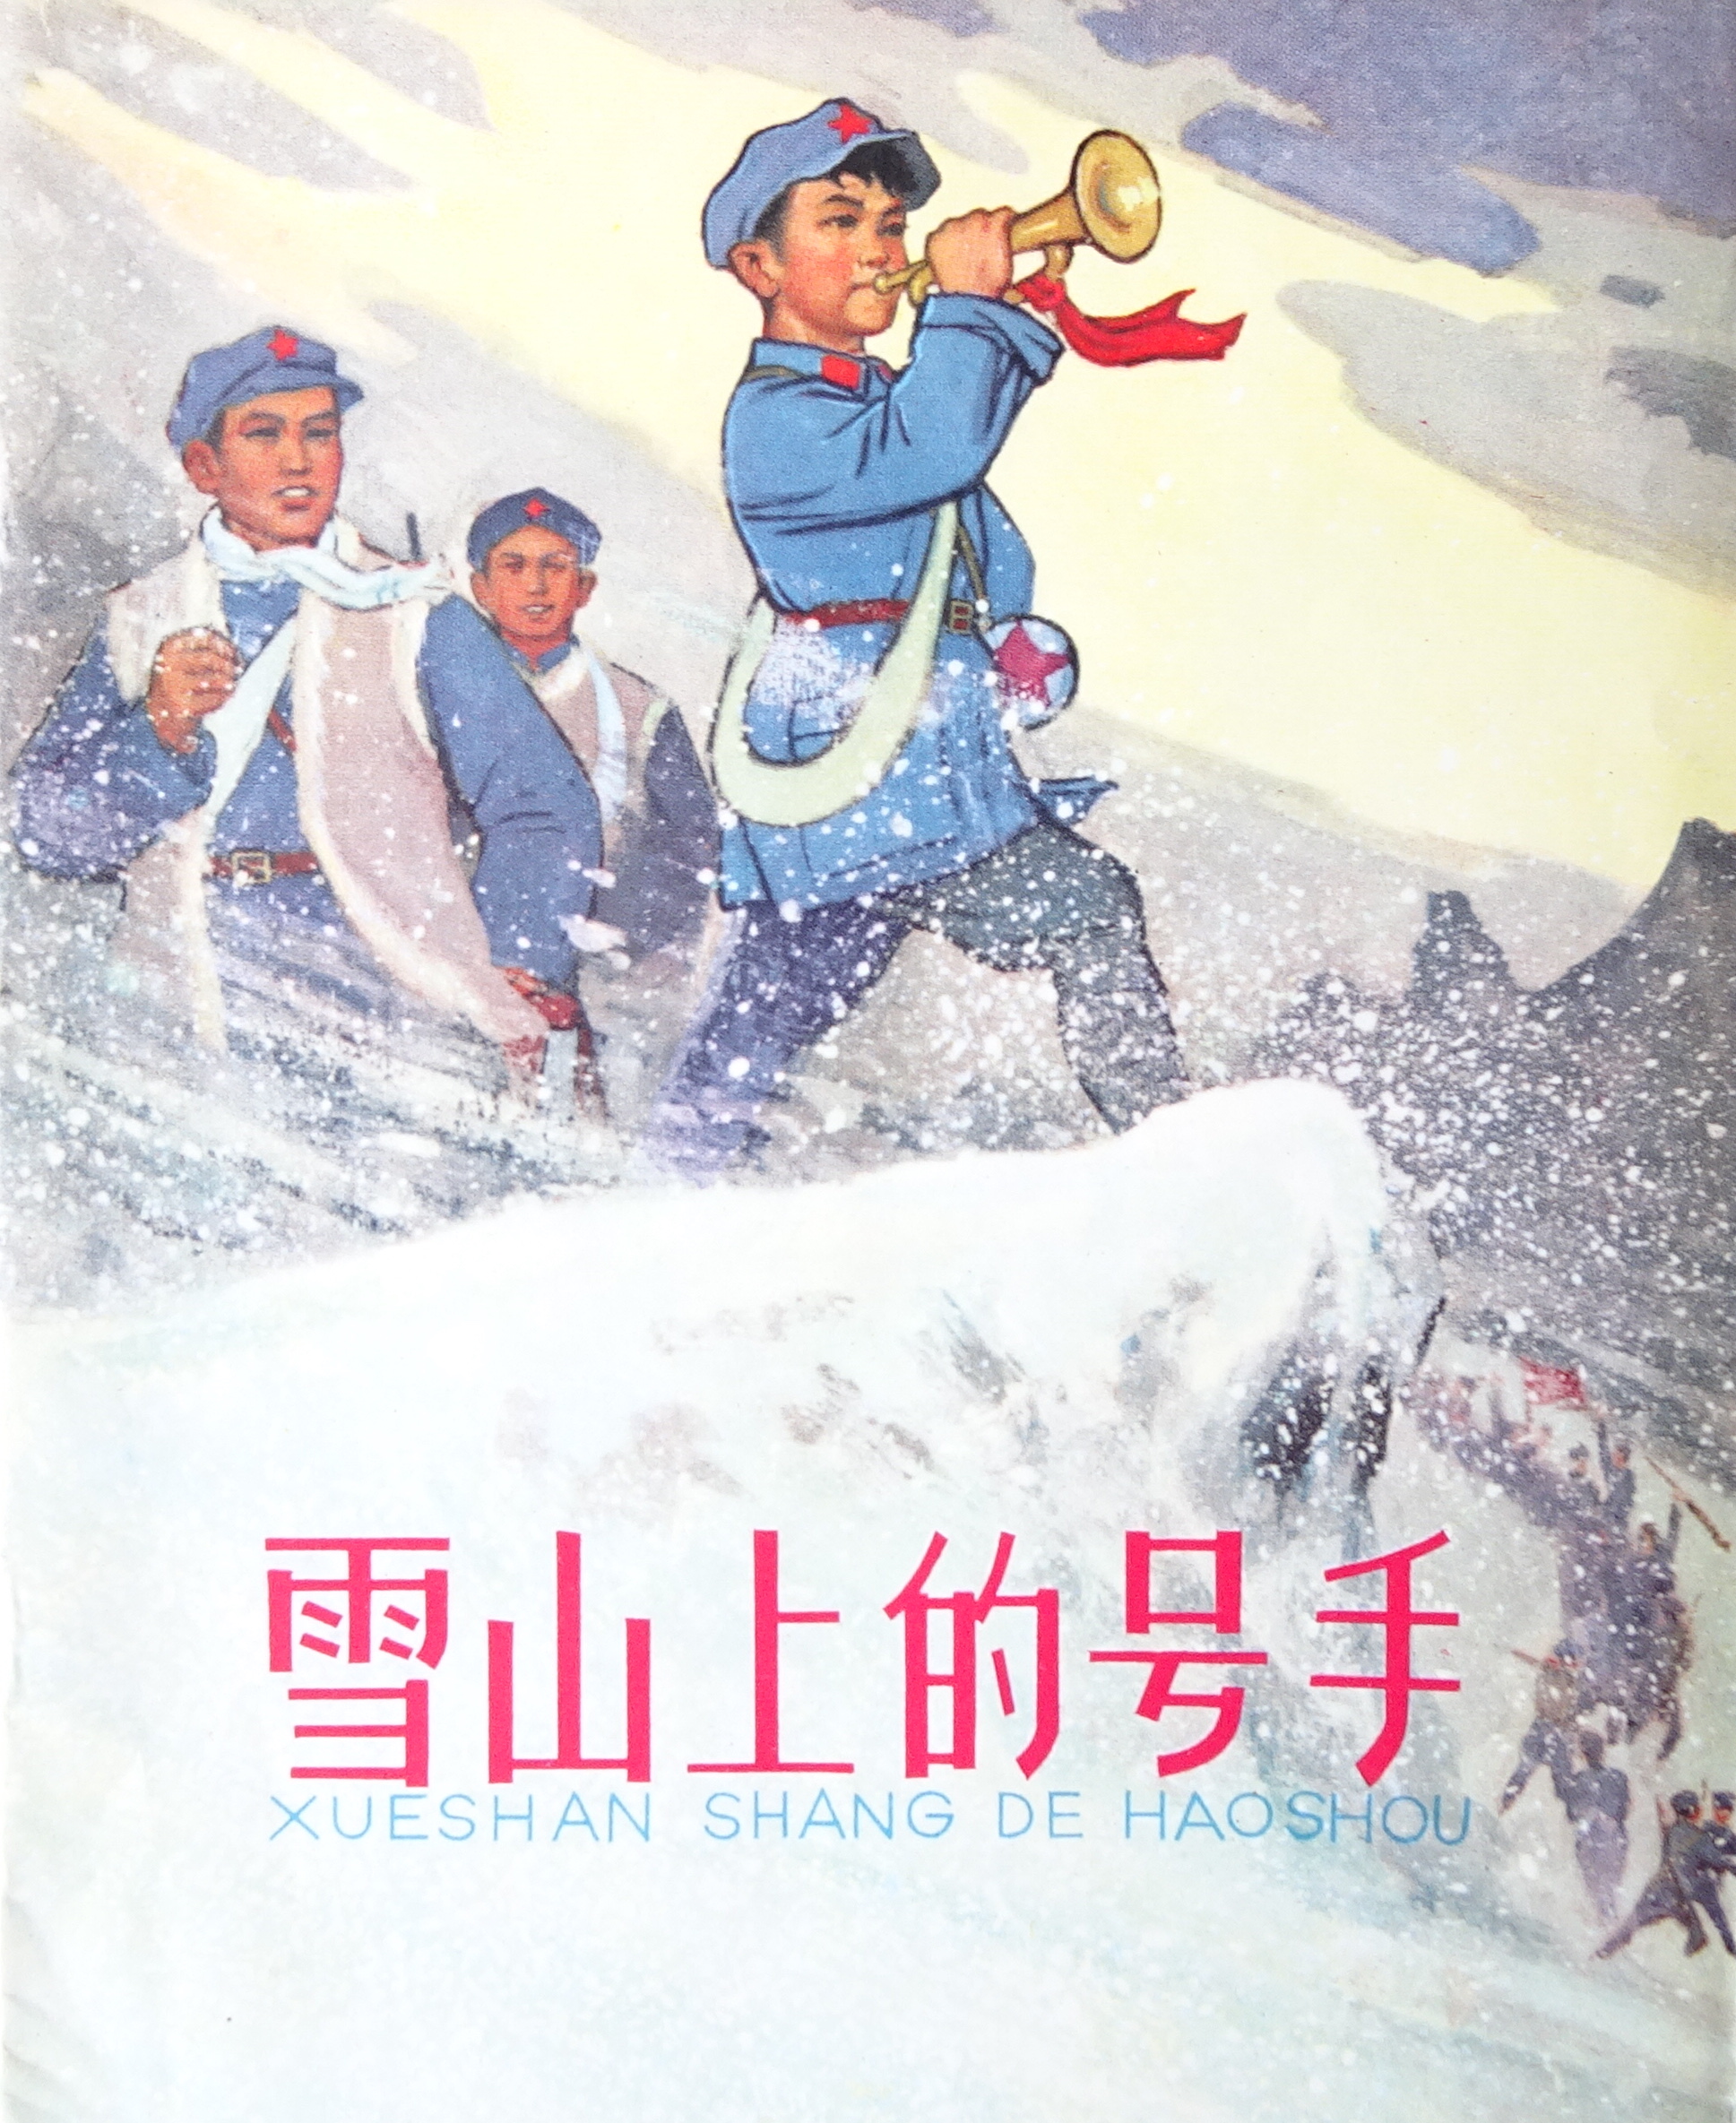 Illustration of a boy blowing a trumpet in uniform on a snowy mountaintop with two men behind him.